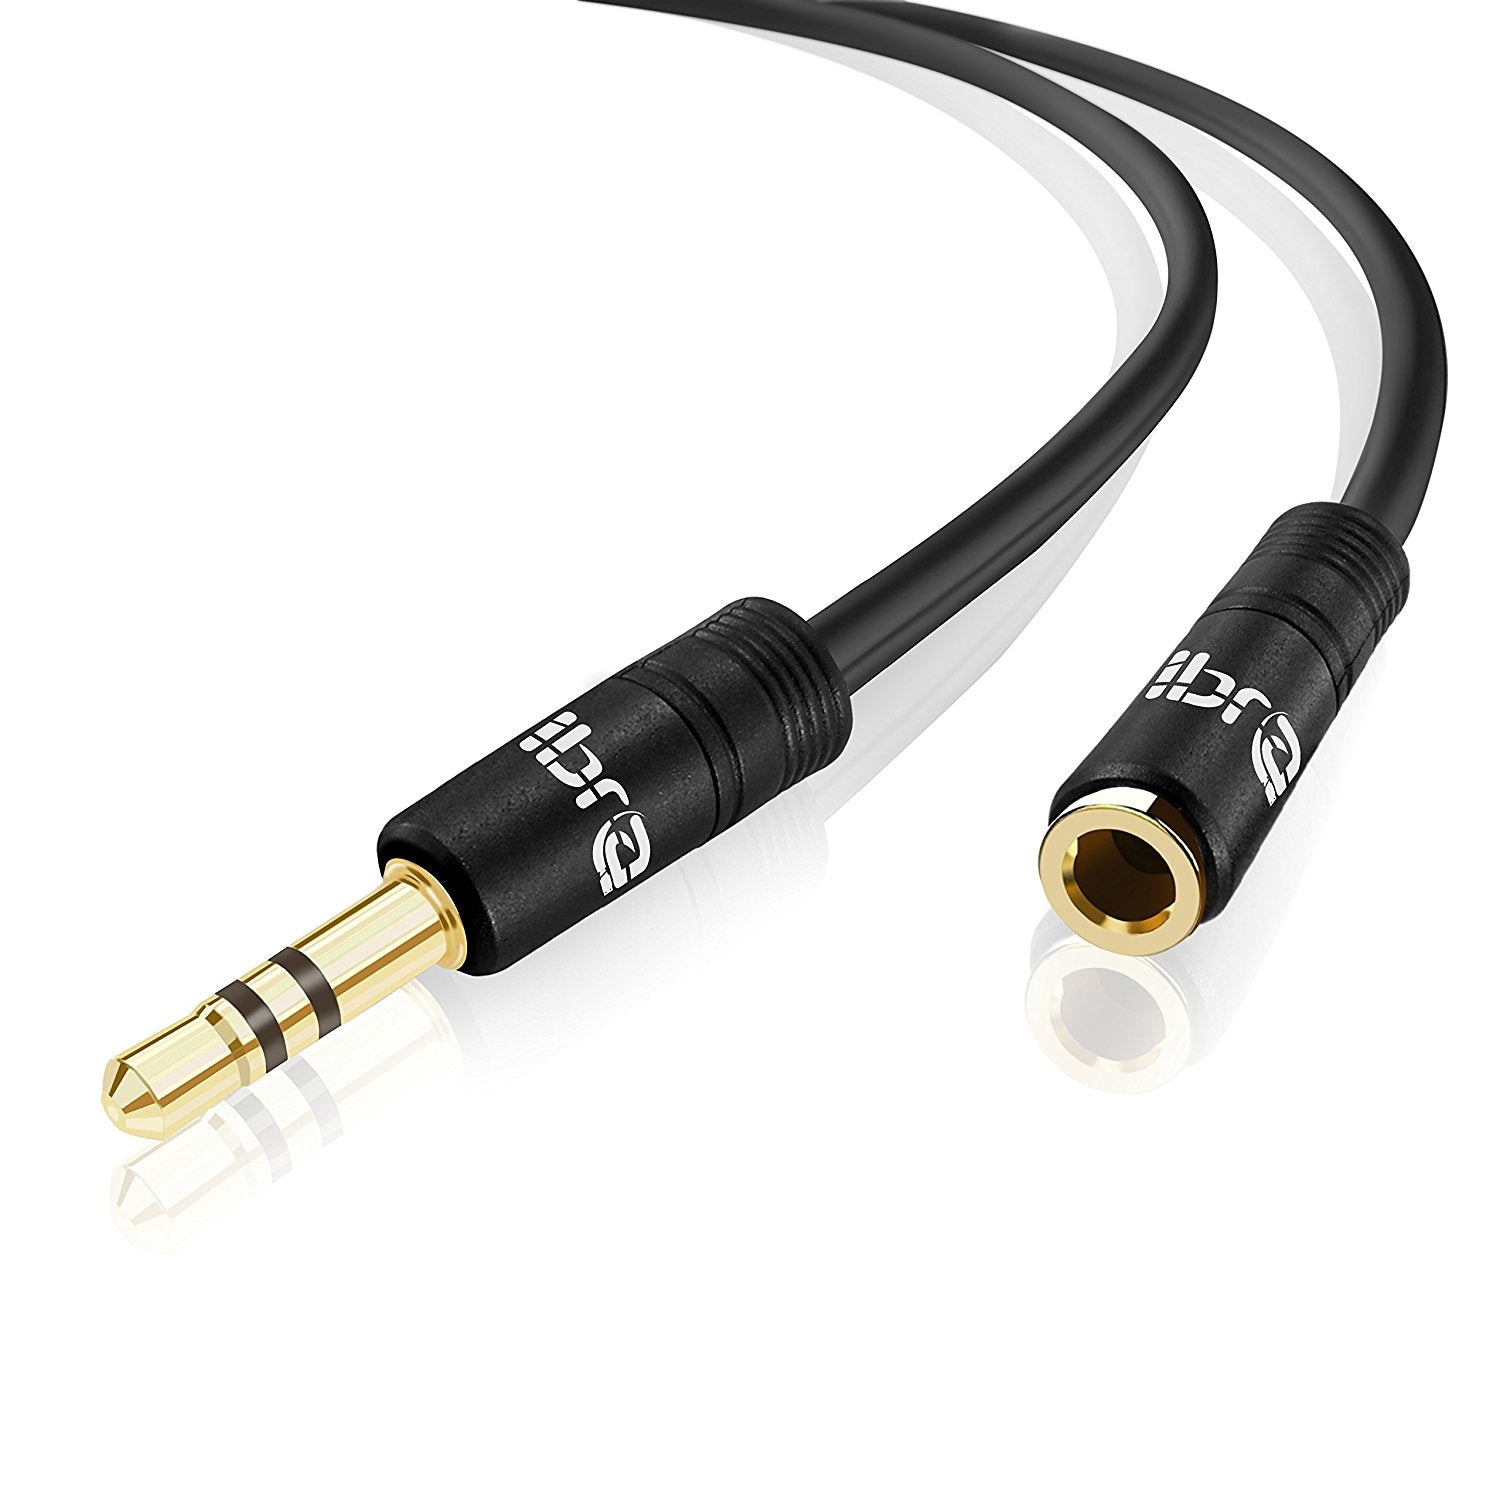 IBRA 2M Stereo Jack Extension Cable 3.5mm Male > 3.5mm Female - Black